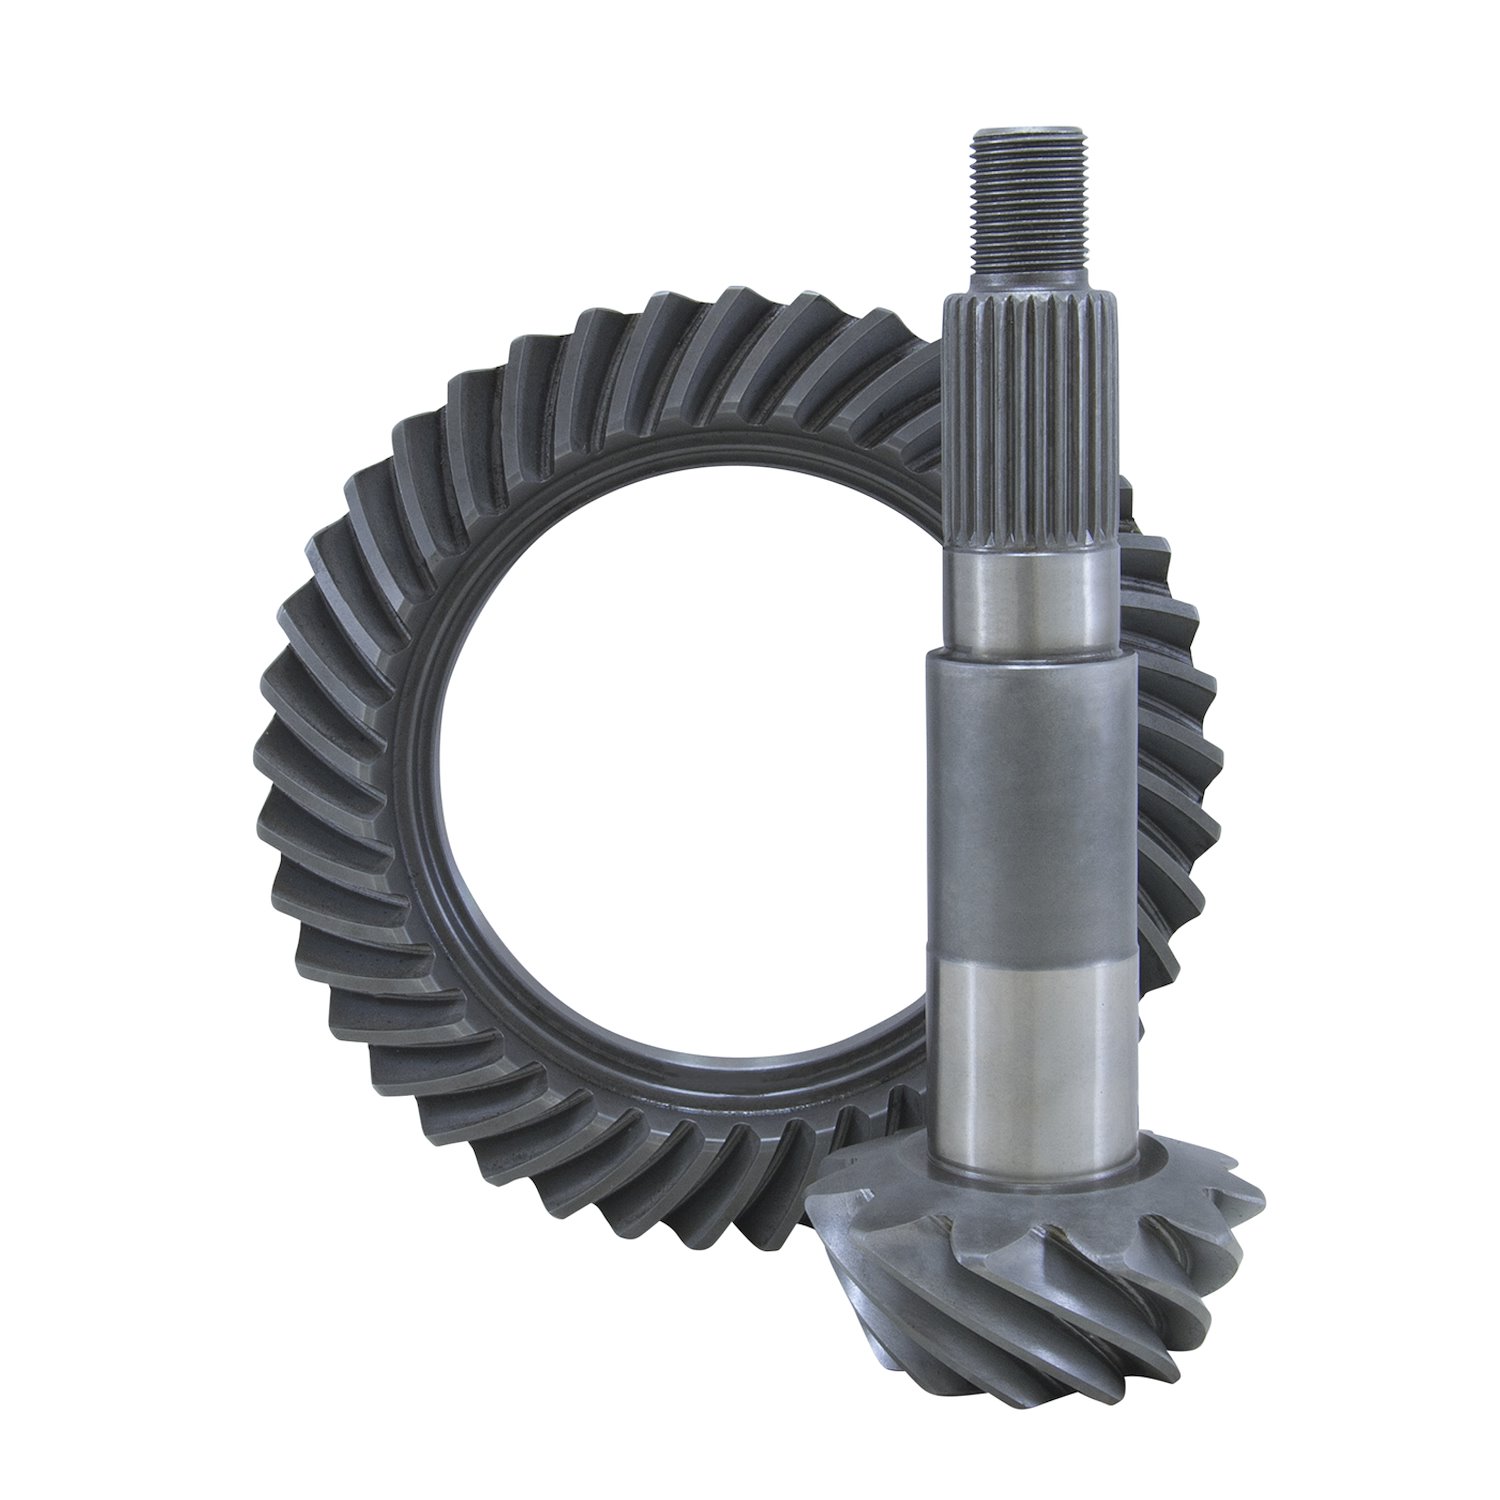 USA Standard ZG D30-456 Ring & Pinion Replacement Gear Set, For Dana 30, 4.56 Ratio